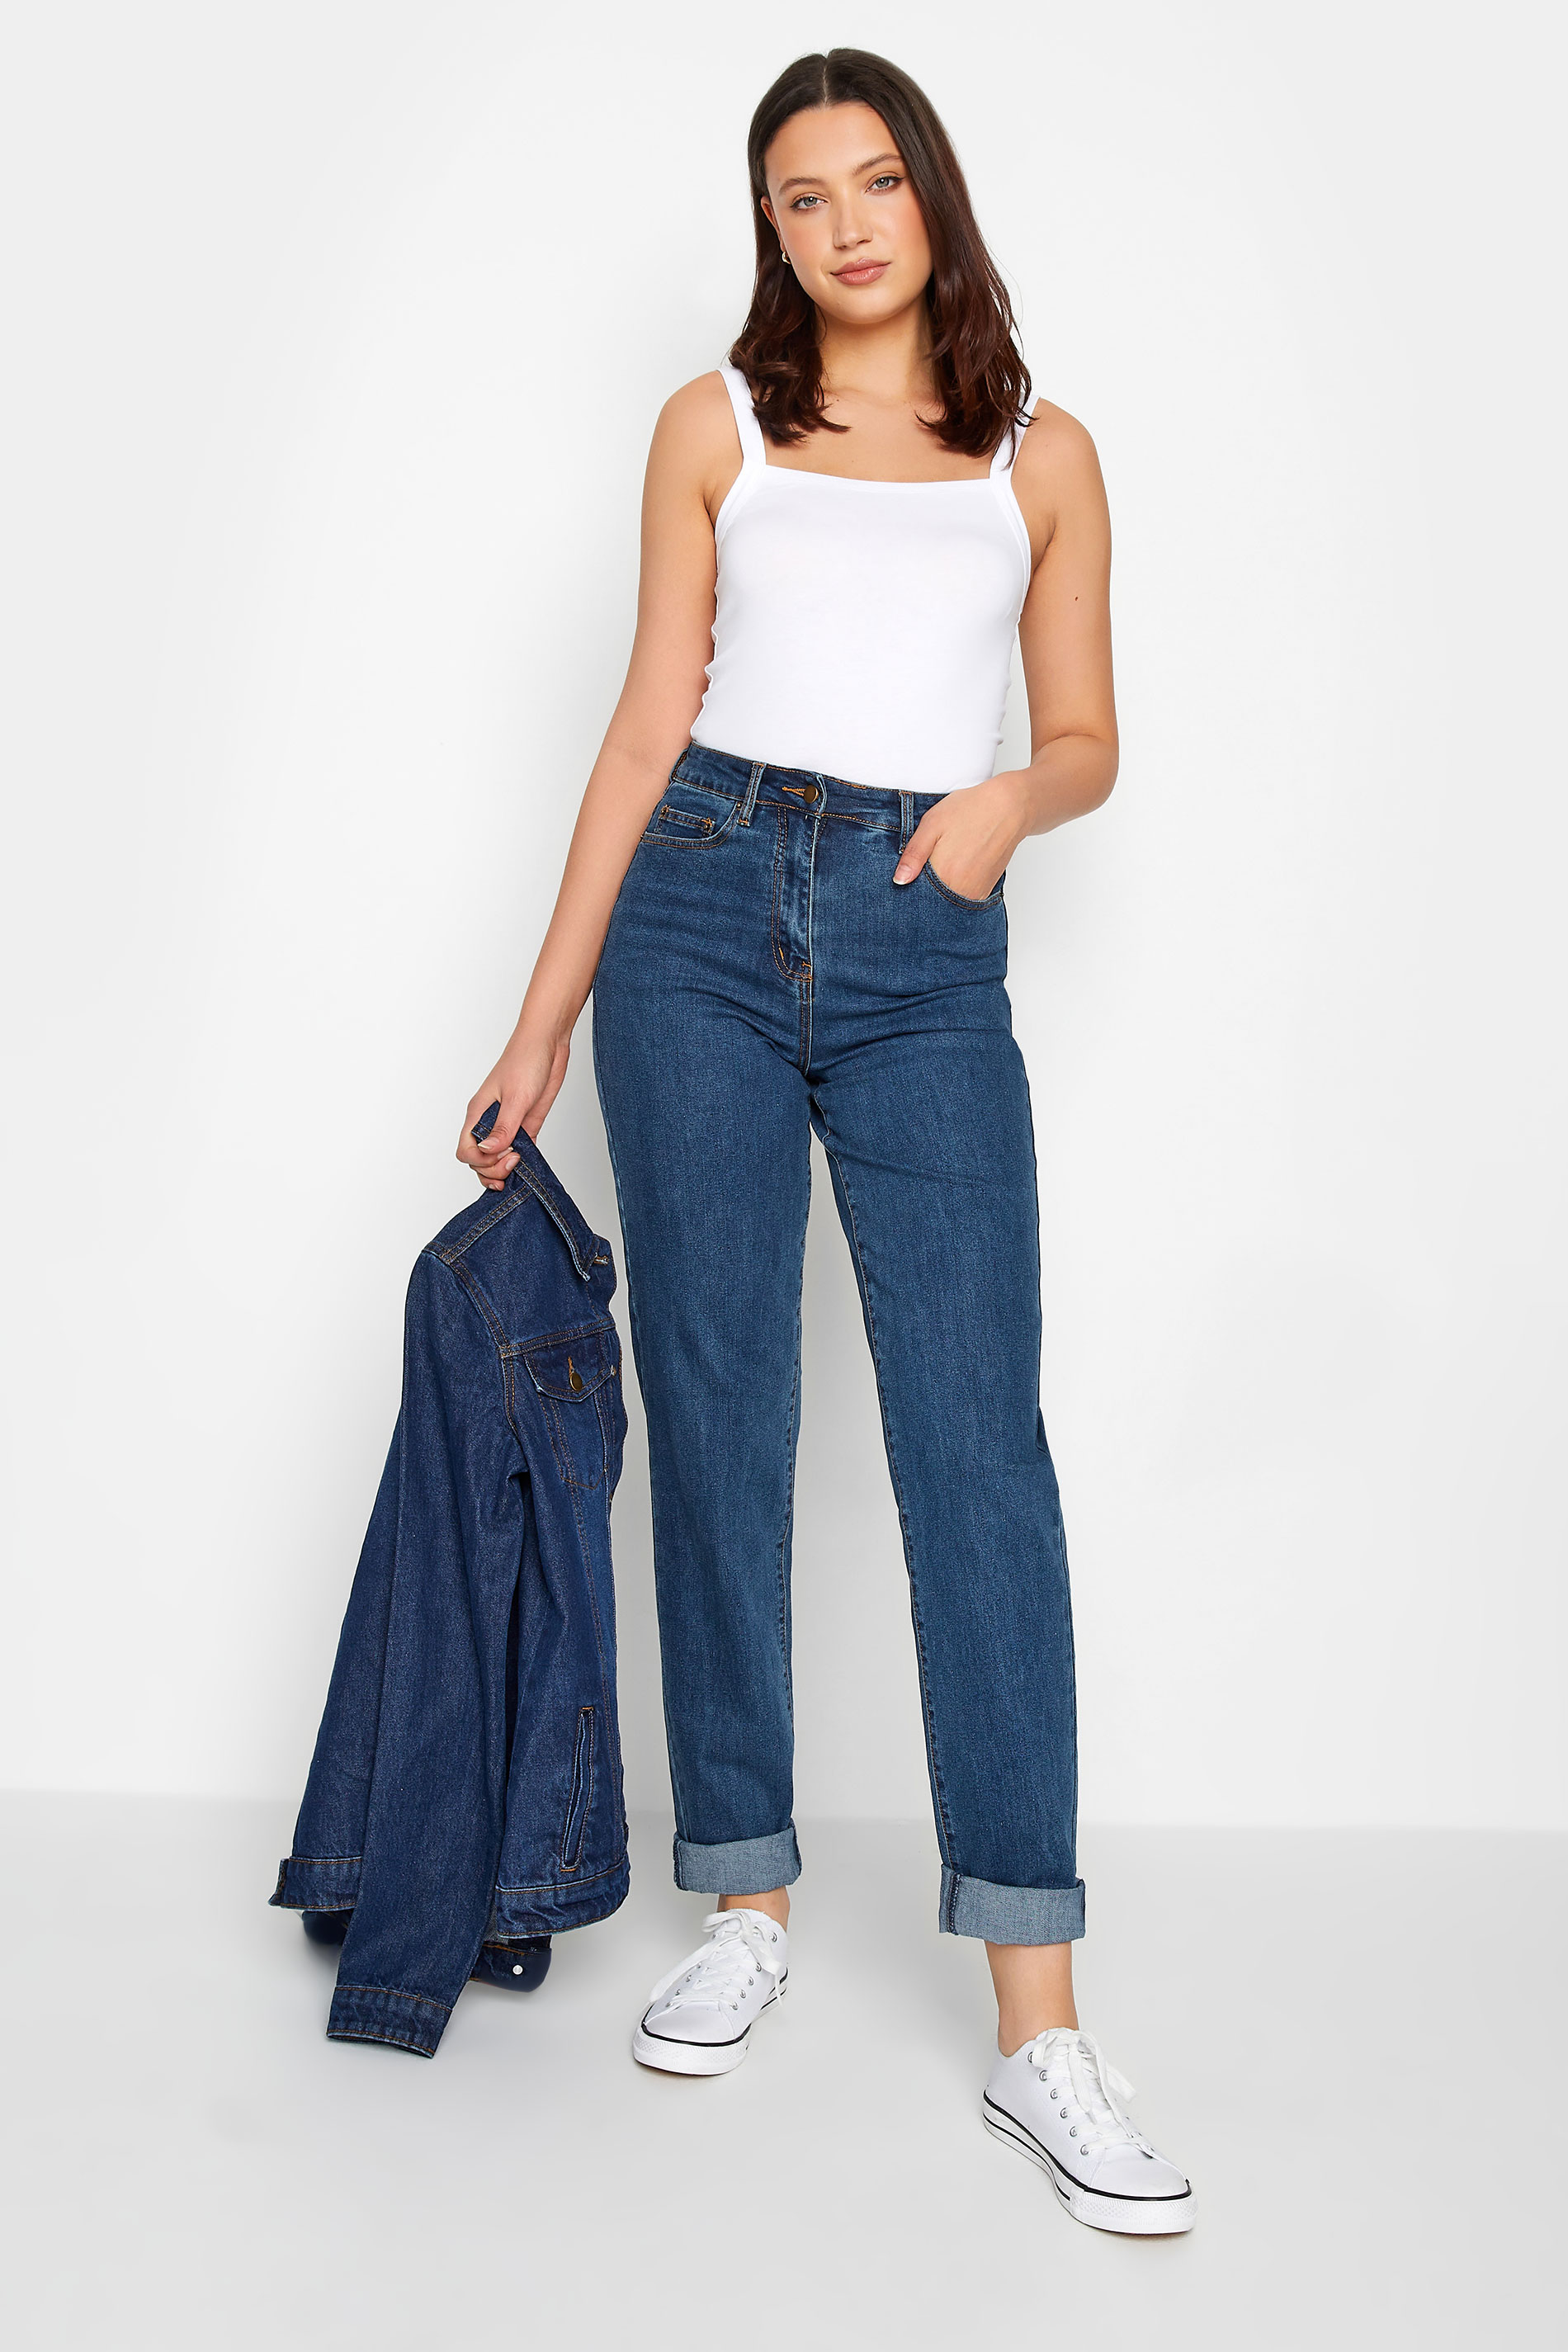 LTS Tall Women's Indigo Blue Washed UNA Mom Jeans | Long Tall Sally 1